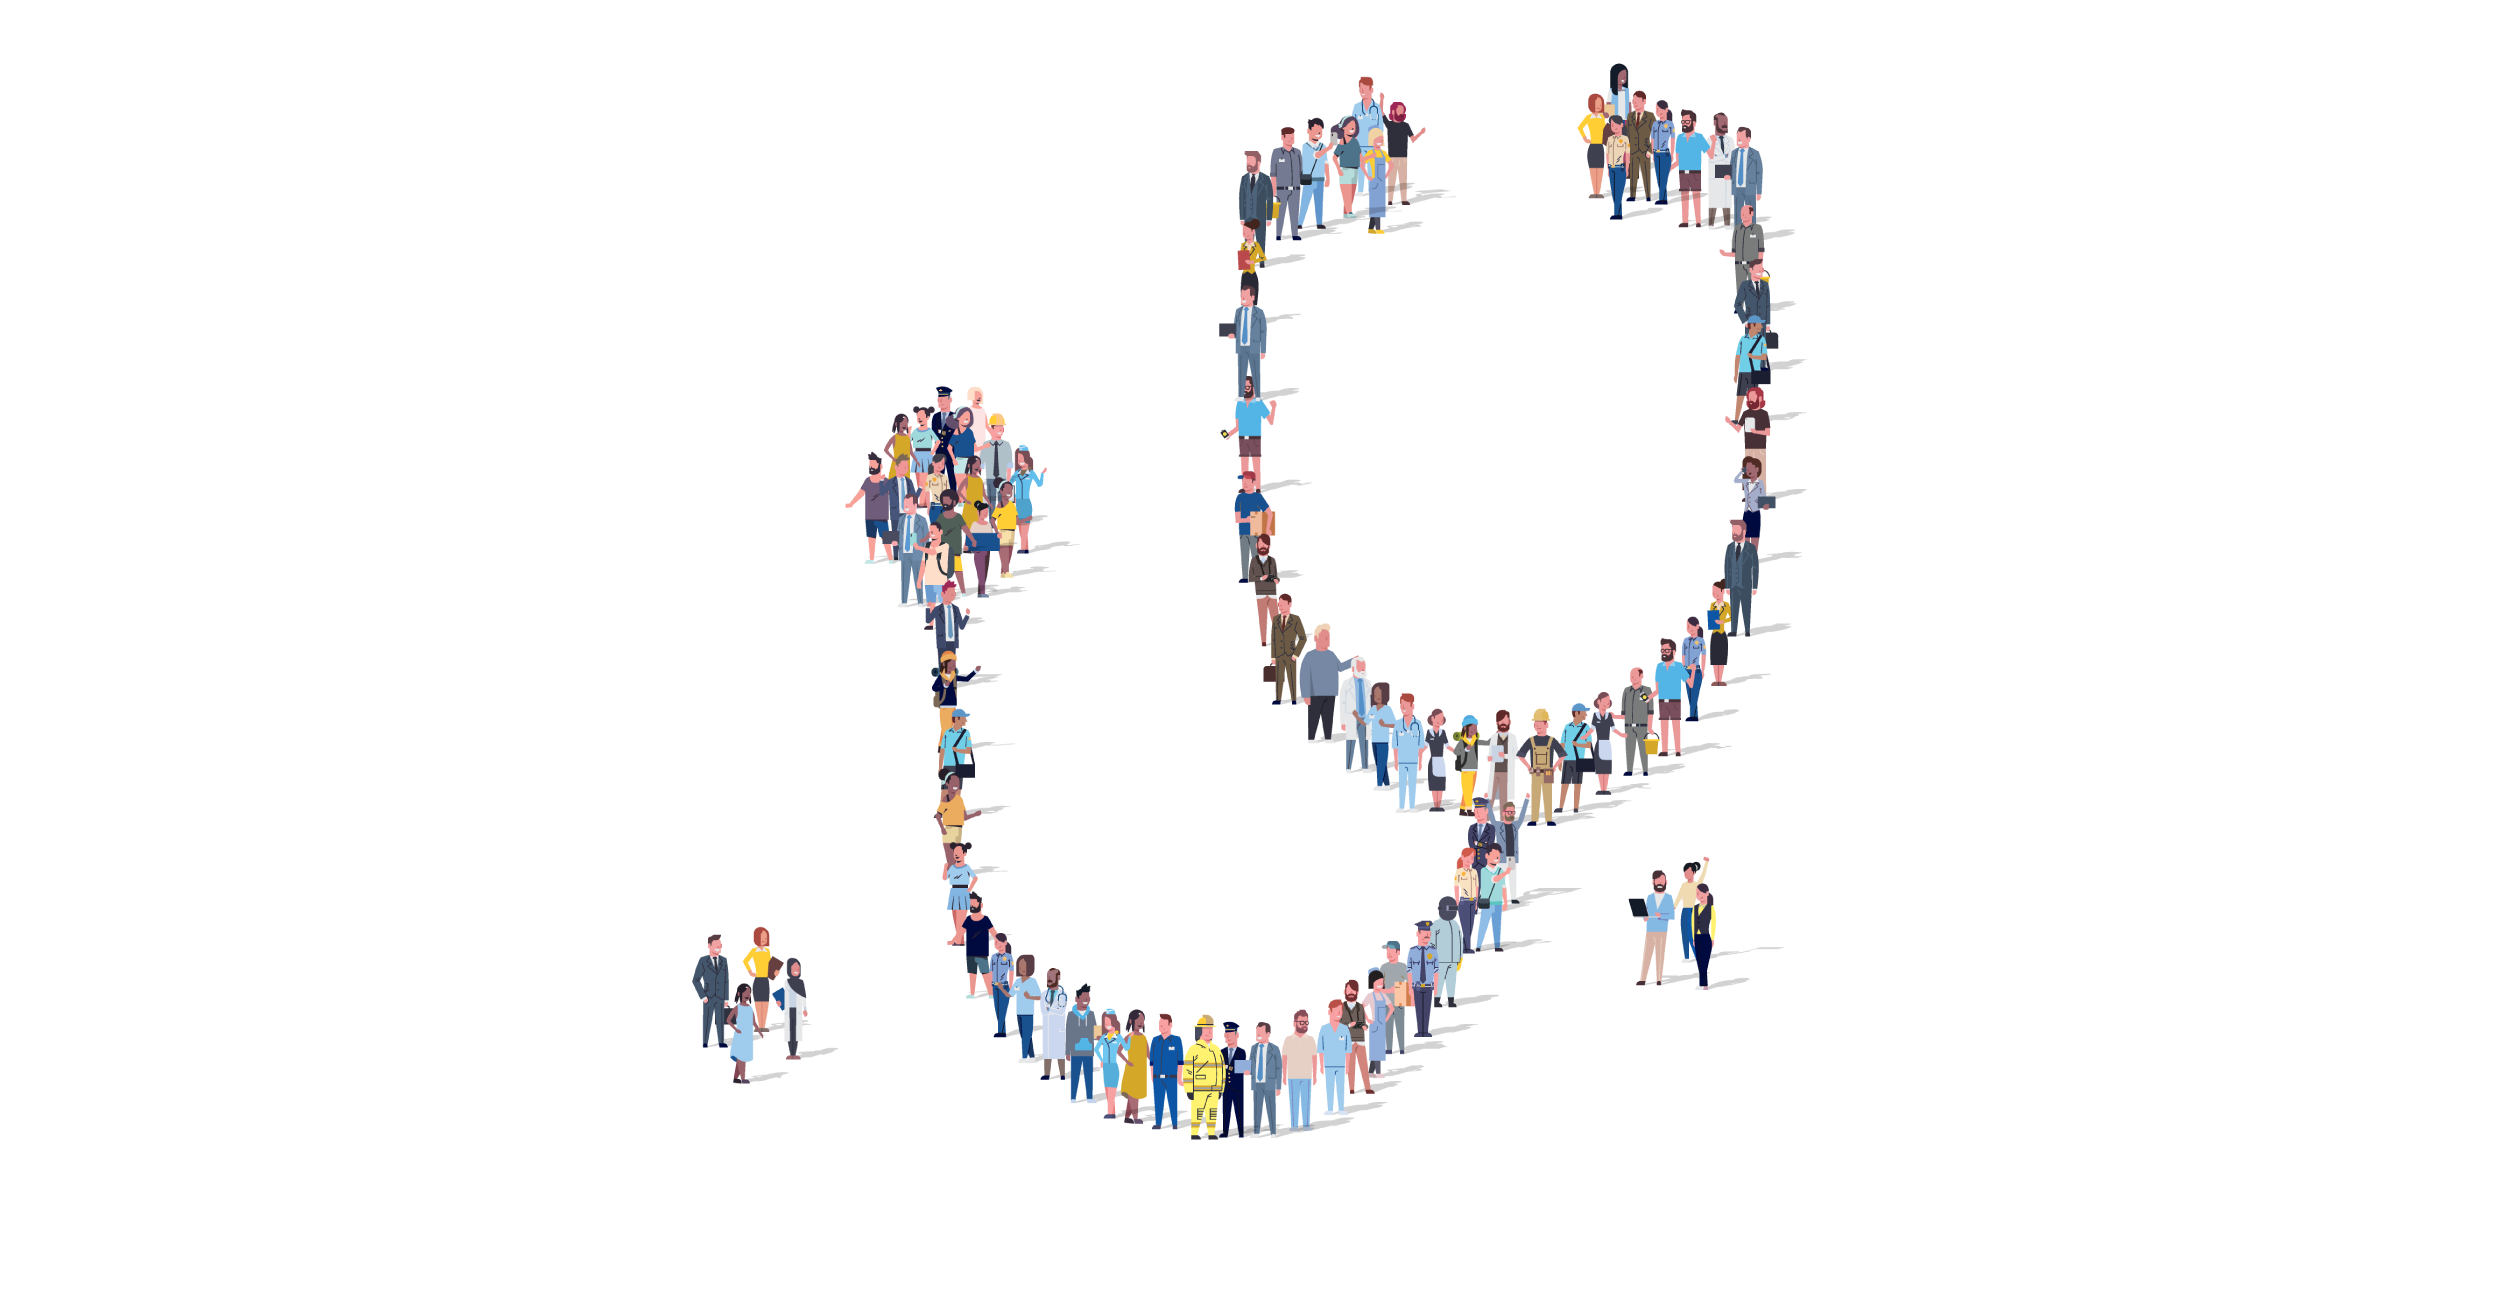 A photo illustration of people standing in a formation that looks like a stethoscope. A few people are standing together out the outskirts.